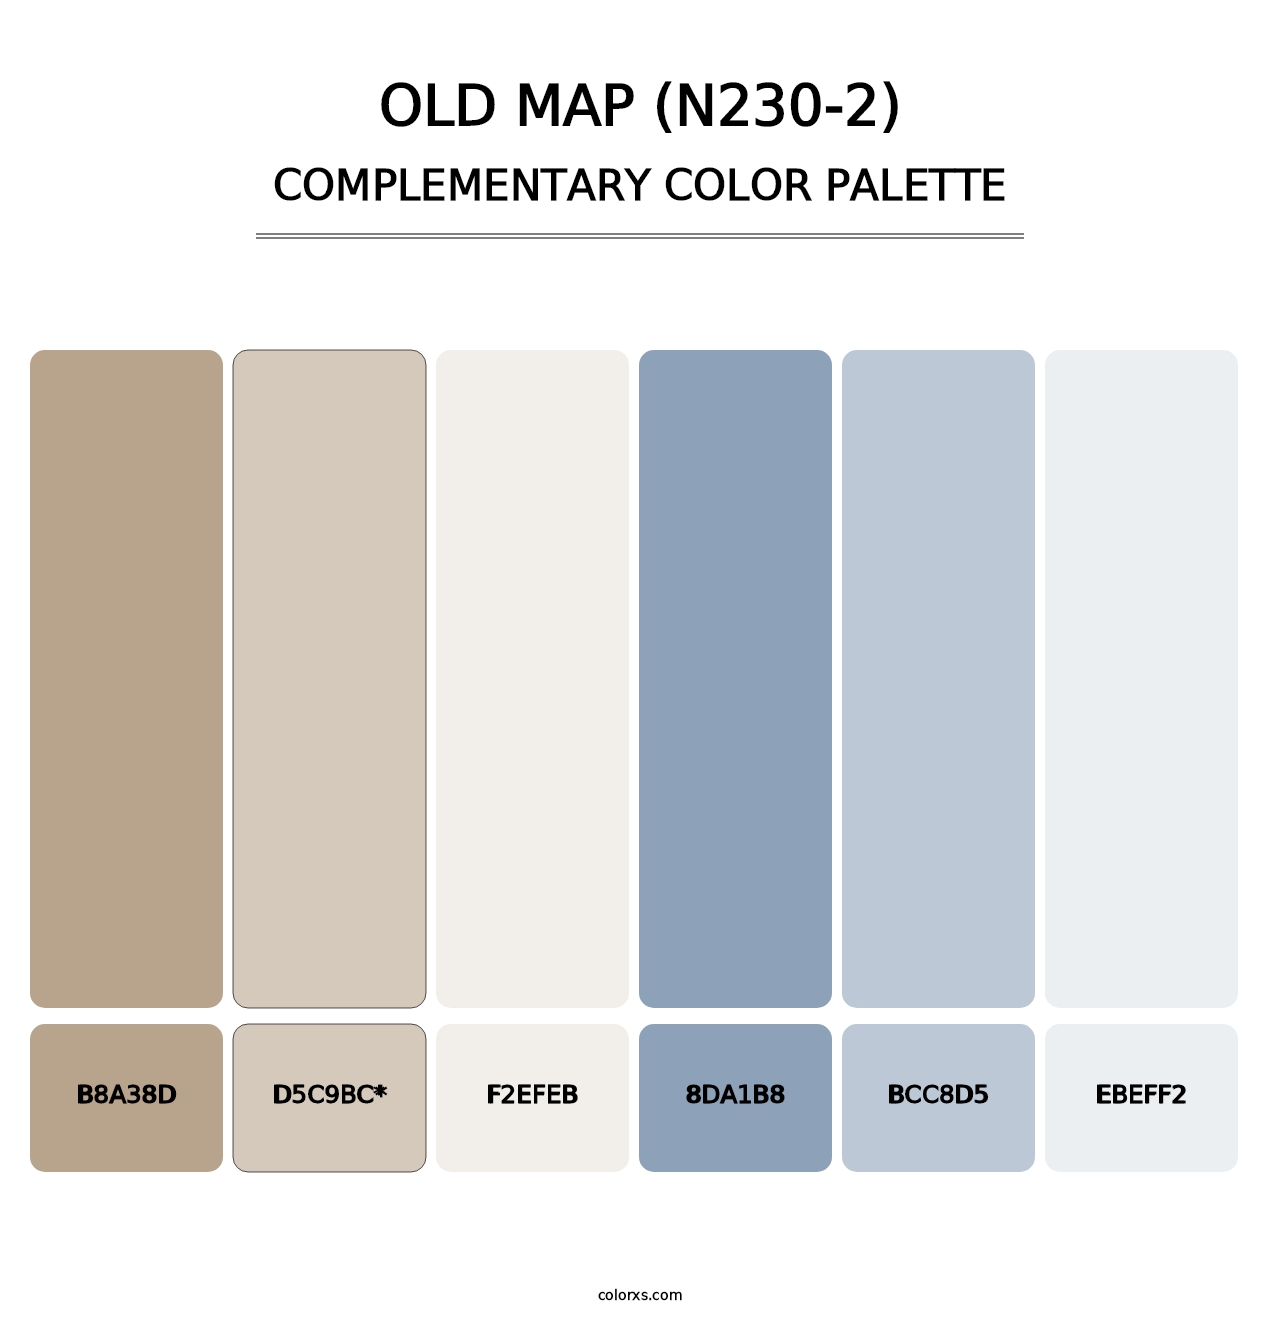 Old Map (N230-2) - Complementary Color Palette